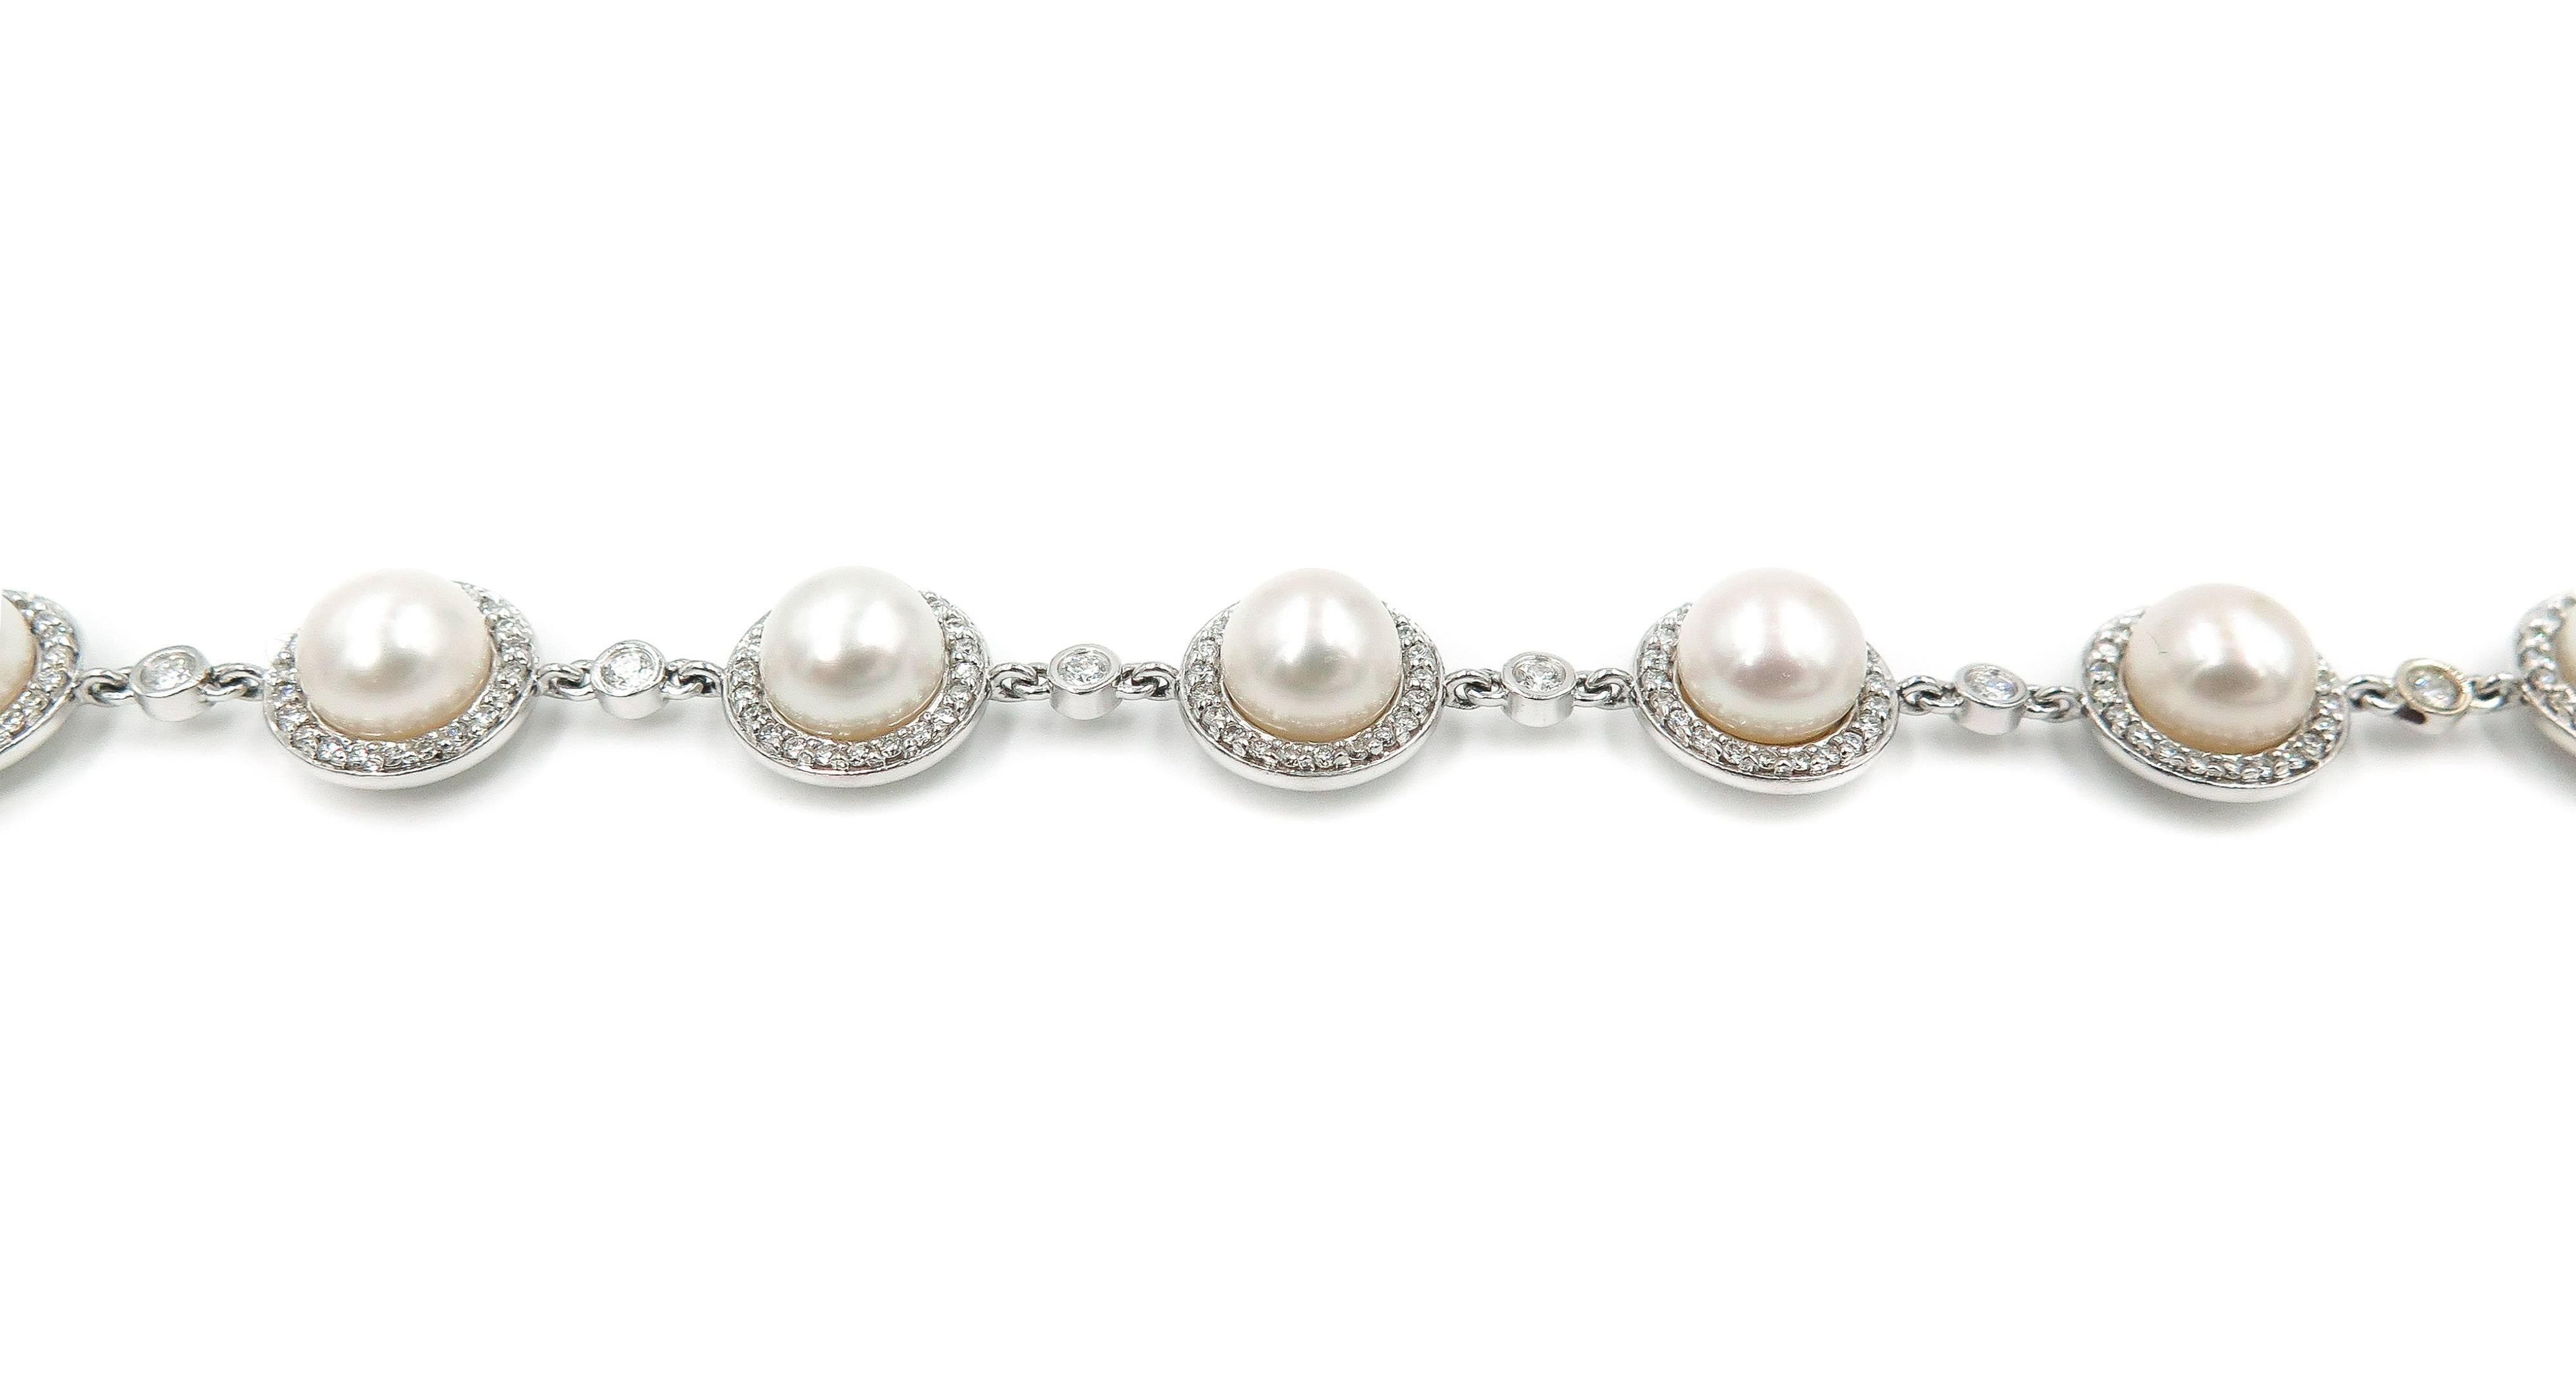 Pearls has always been part of a woman's staple jewelry collection.
This pearl bracelet features 10 beautiful pearls of 7-7.5mm in diameter perfectly framed by a halo of white diamonds set in 14k white gold with a hidden box clasp.
Measures 7 inches